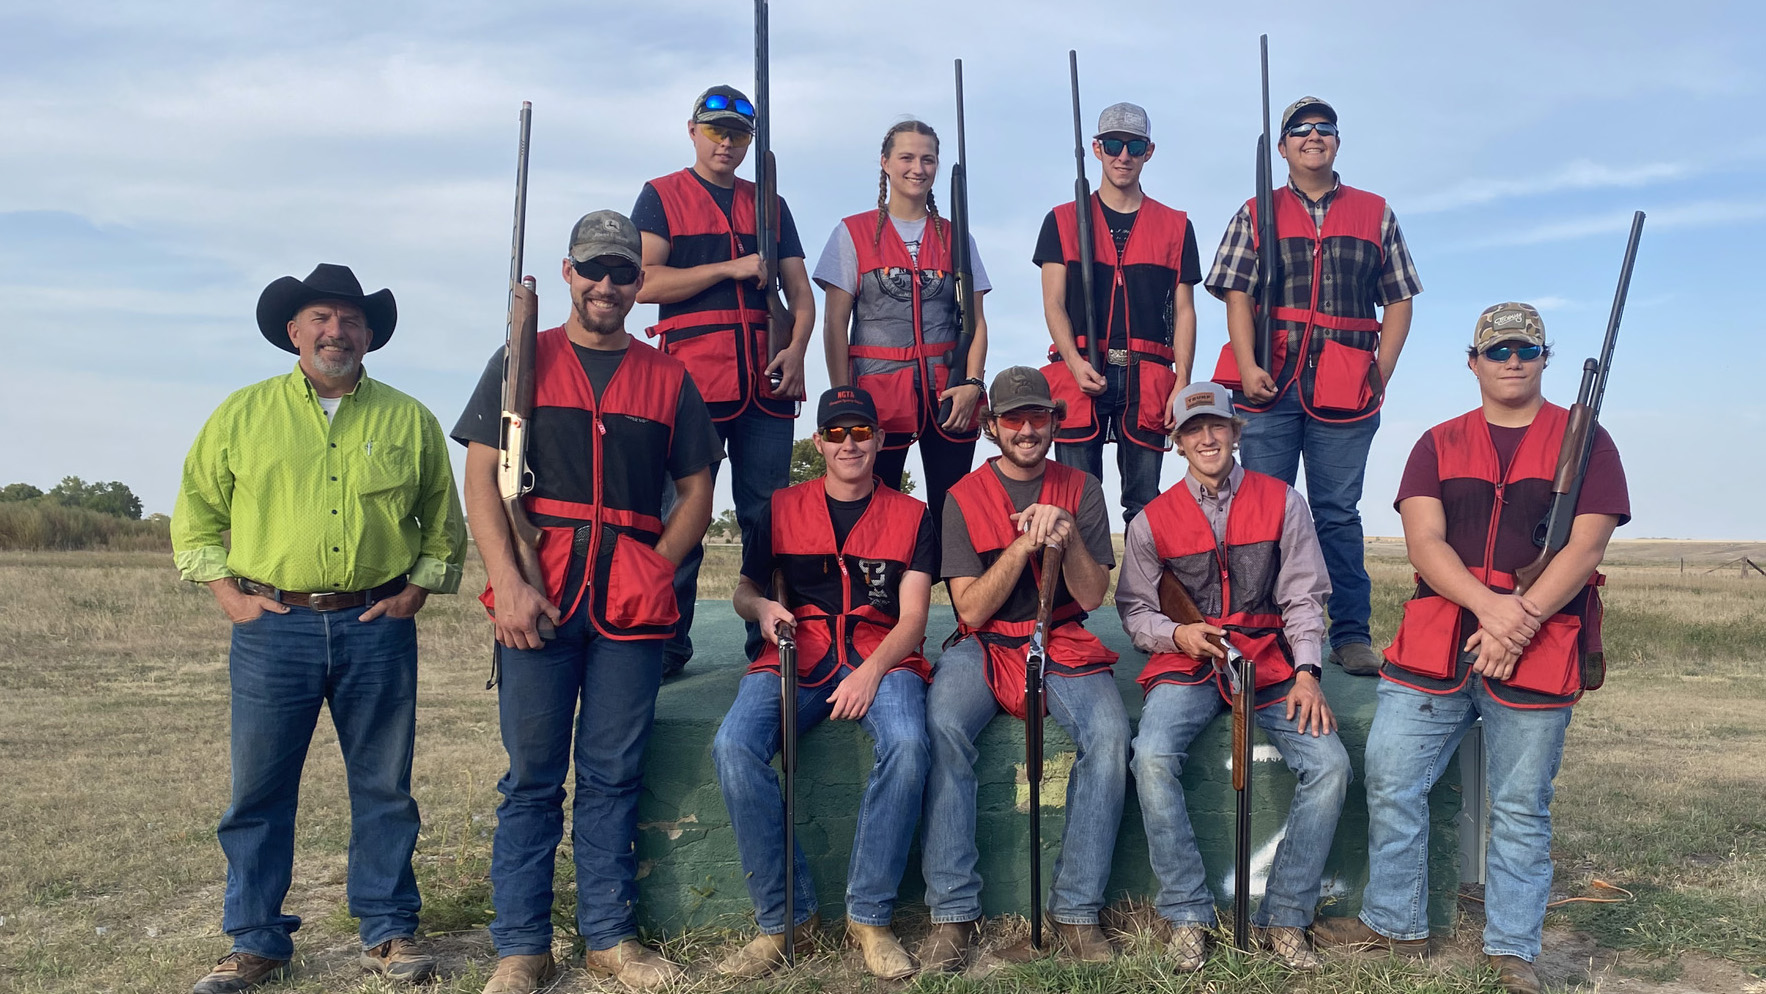 The Aggie Shotgun Sports Team will host a Sporting Clay Shoot on Labor Day in Curtis. The team has doubled to 20 members since this photo was taken in 2020 with Coach Alan Taylor, at left, (NCTA News file photo)